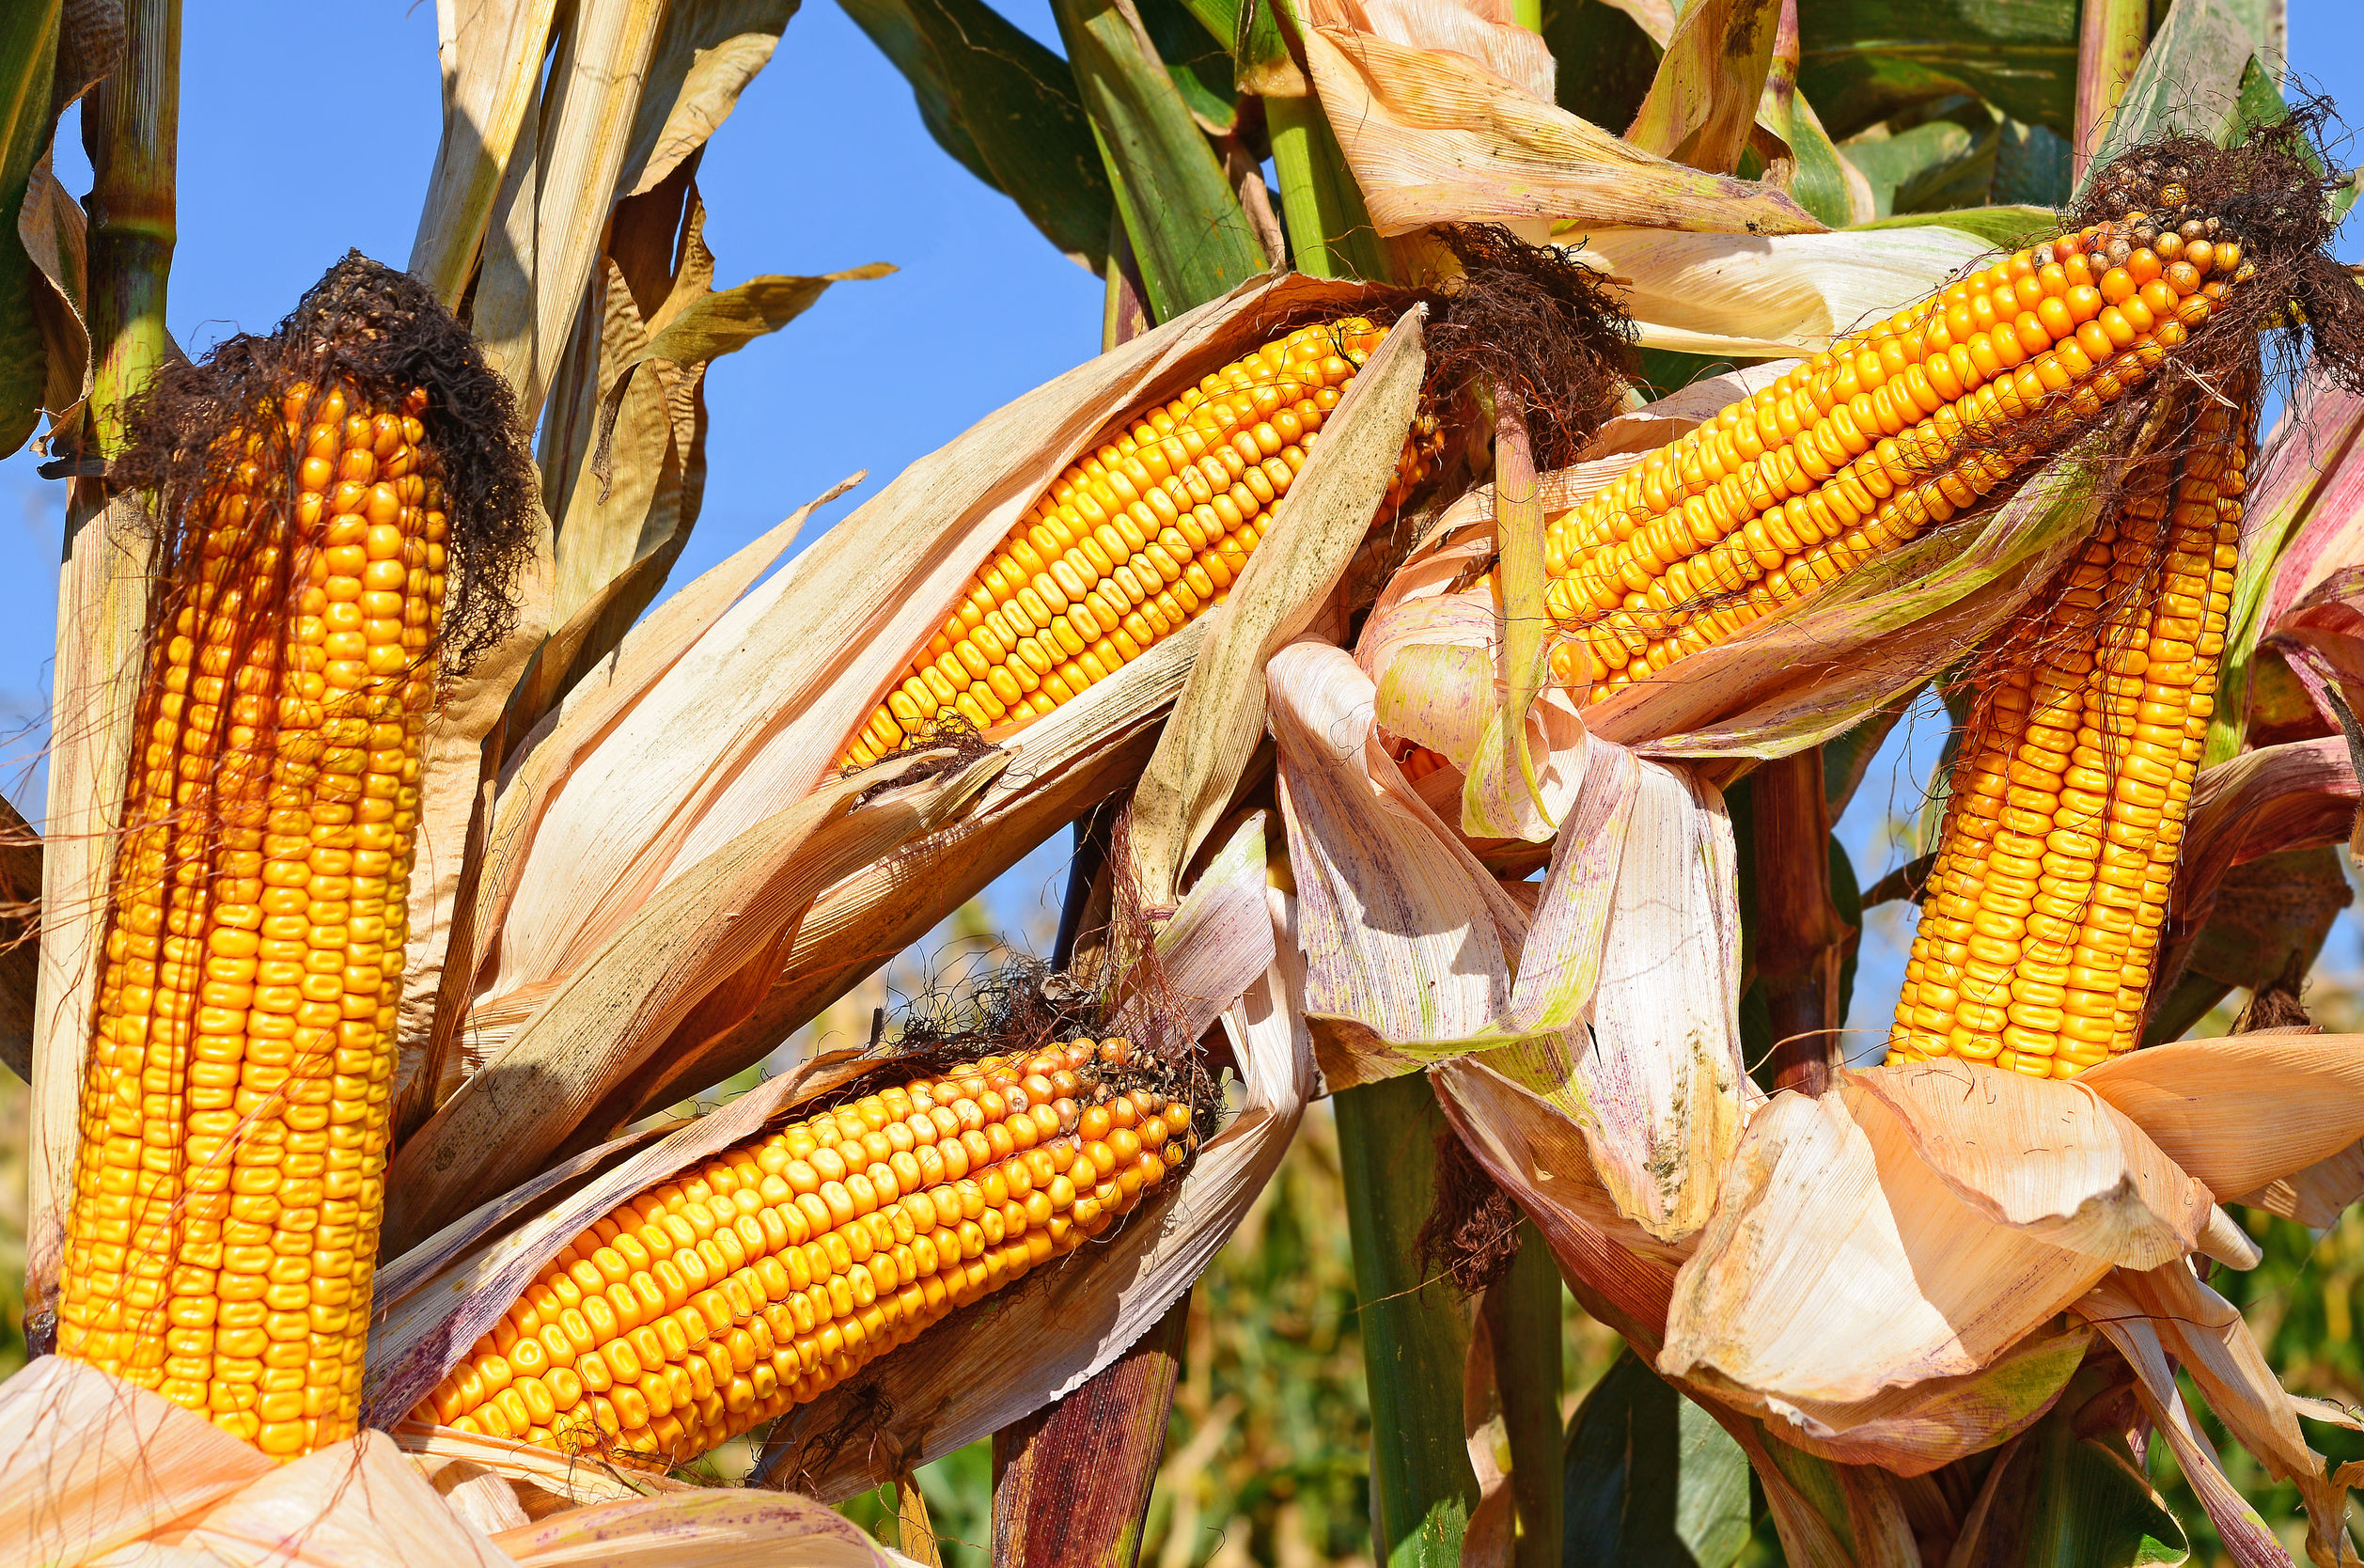 Photo of corn - from article on corn facts - brought to you by the Farming God's Way ministry of Heaven's Family